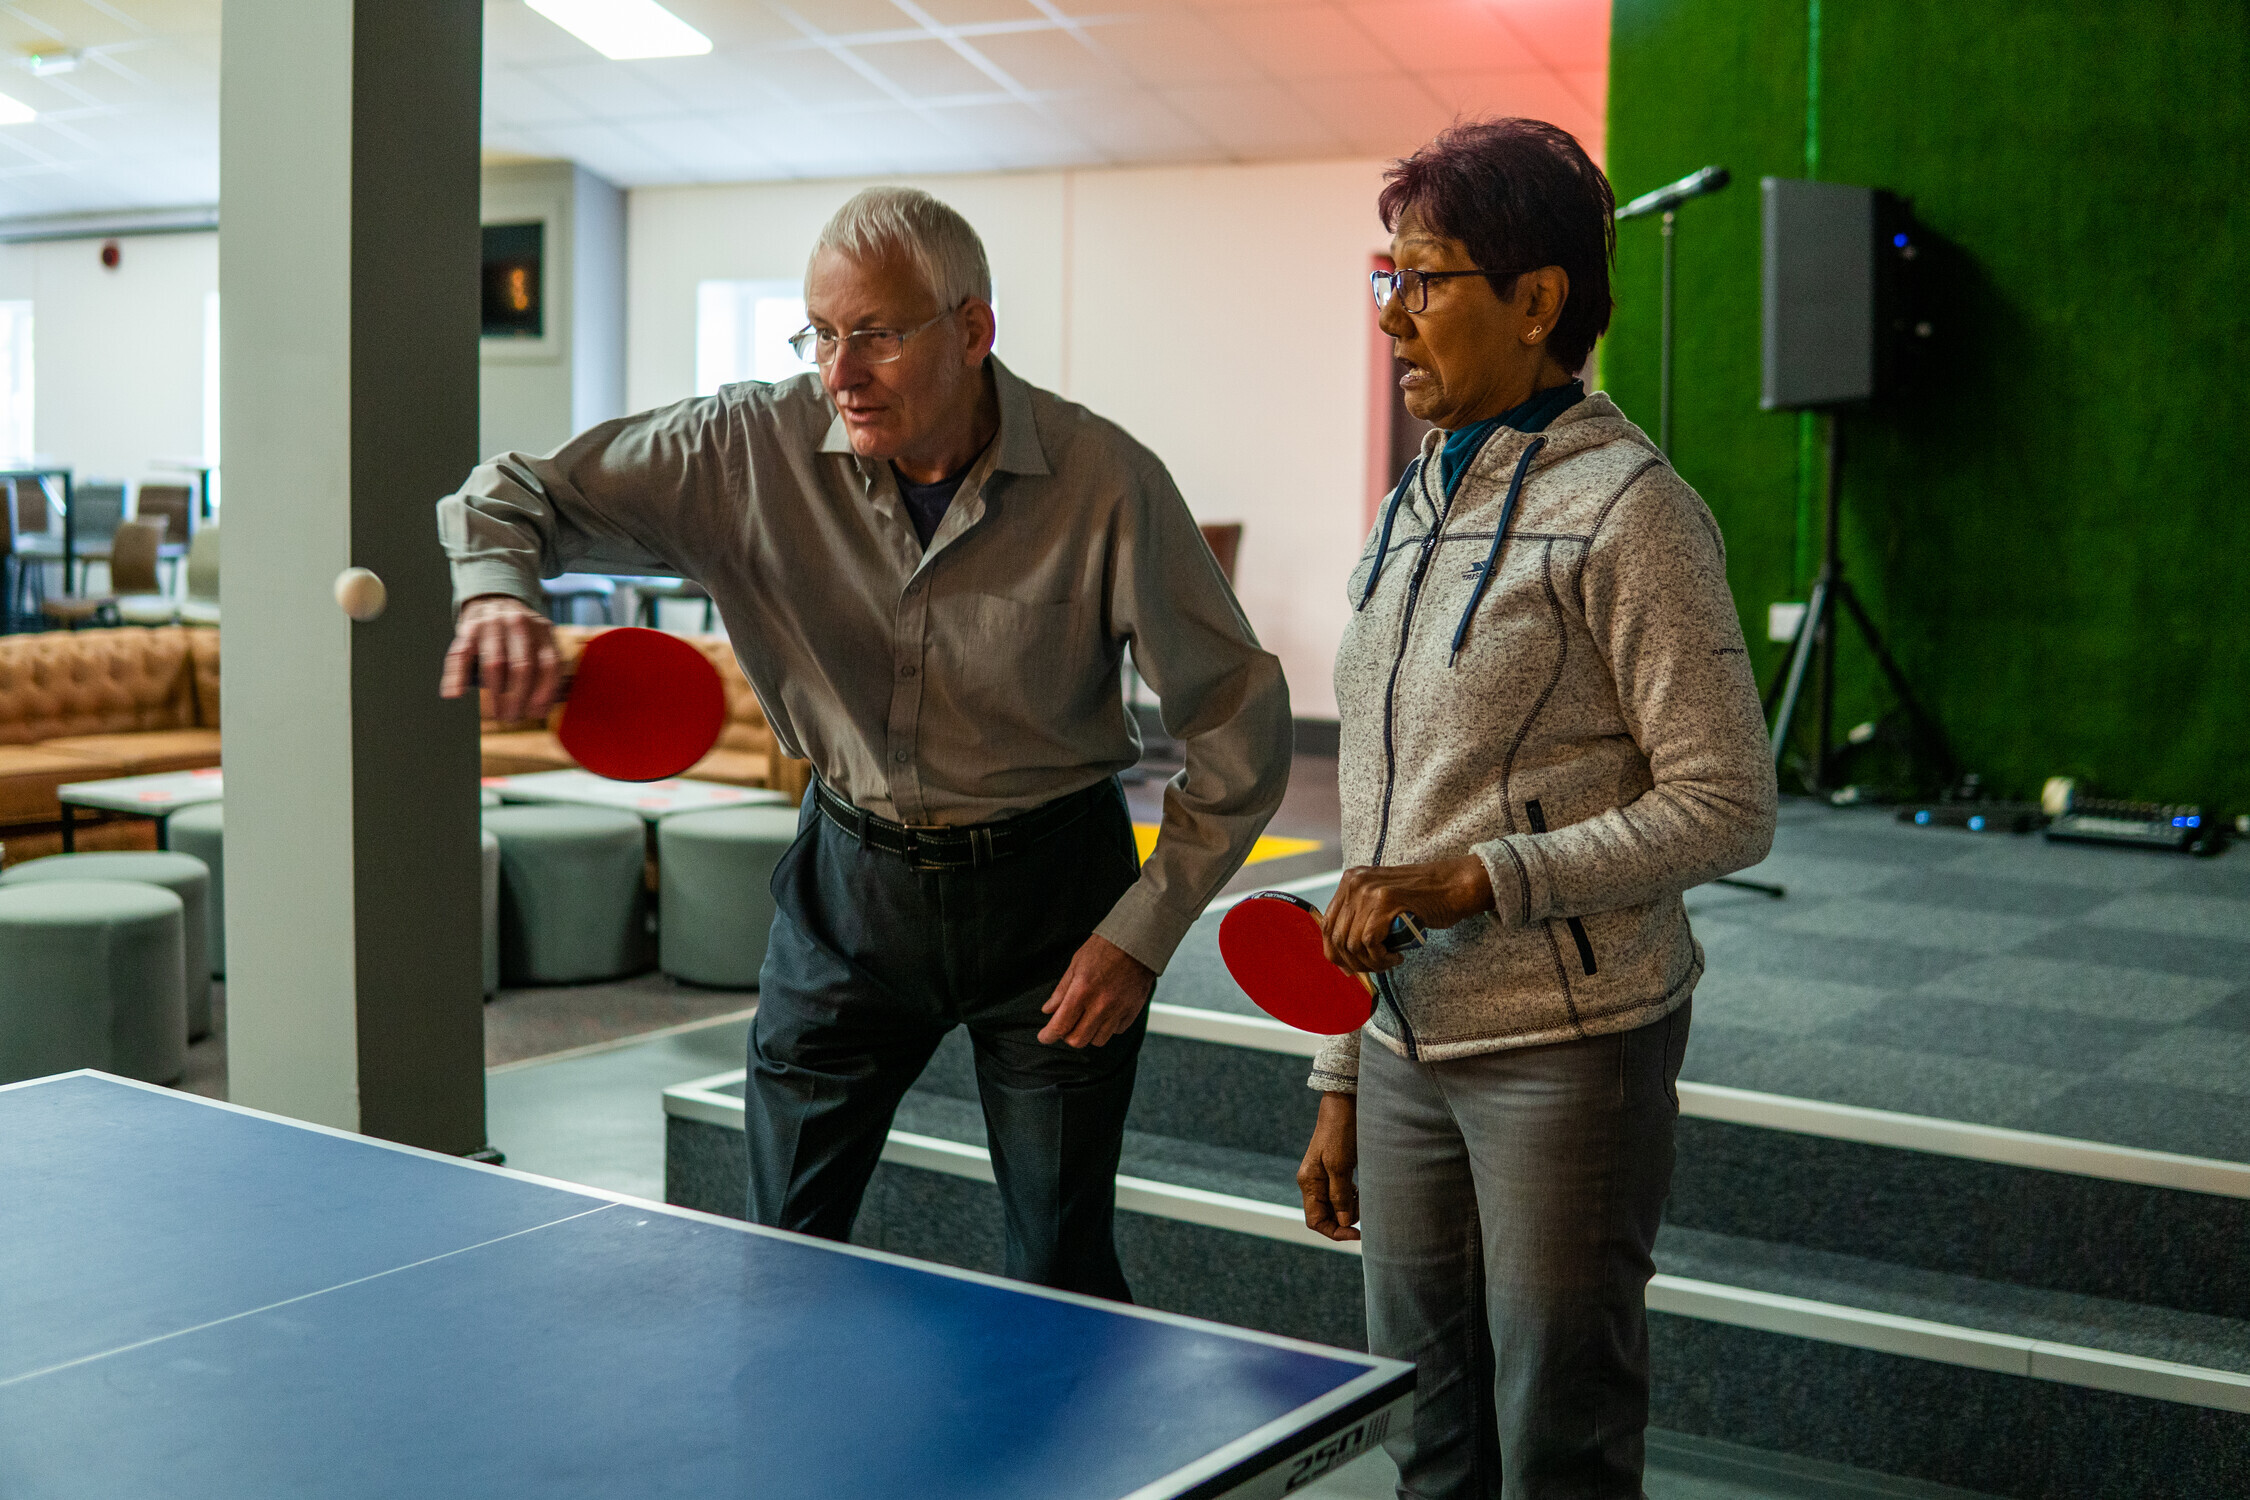 Playing Table Tennis Lincolnshire